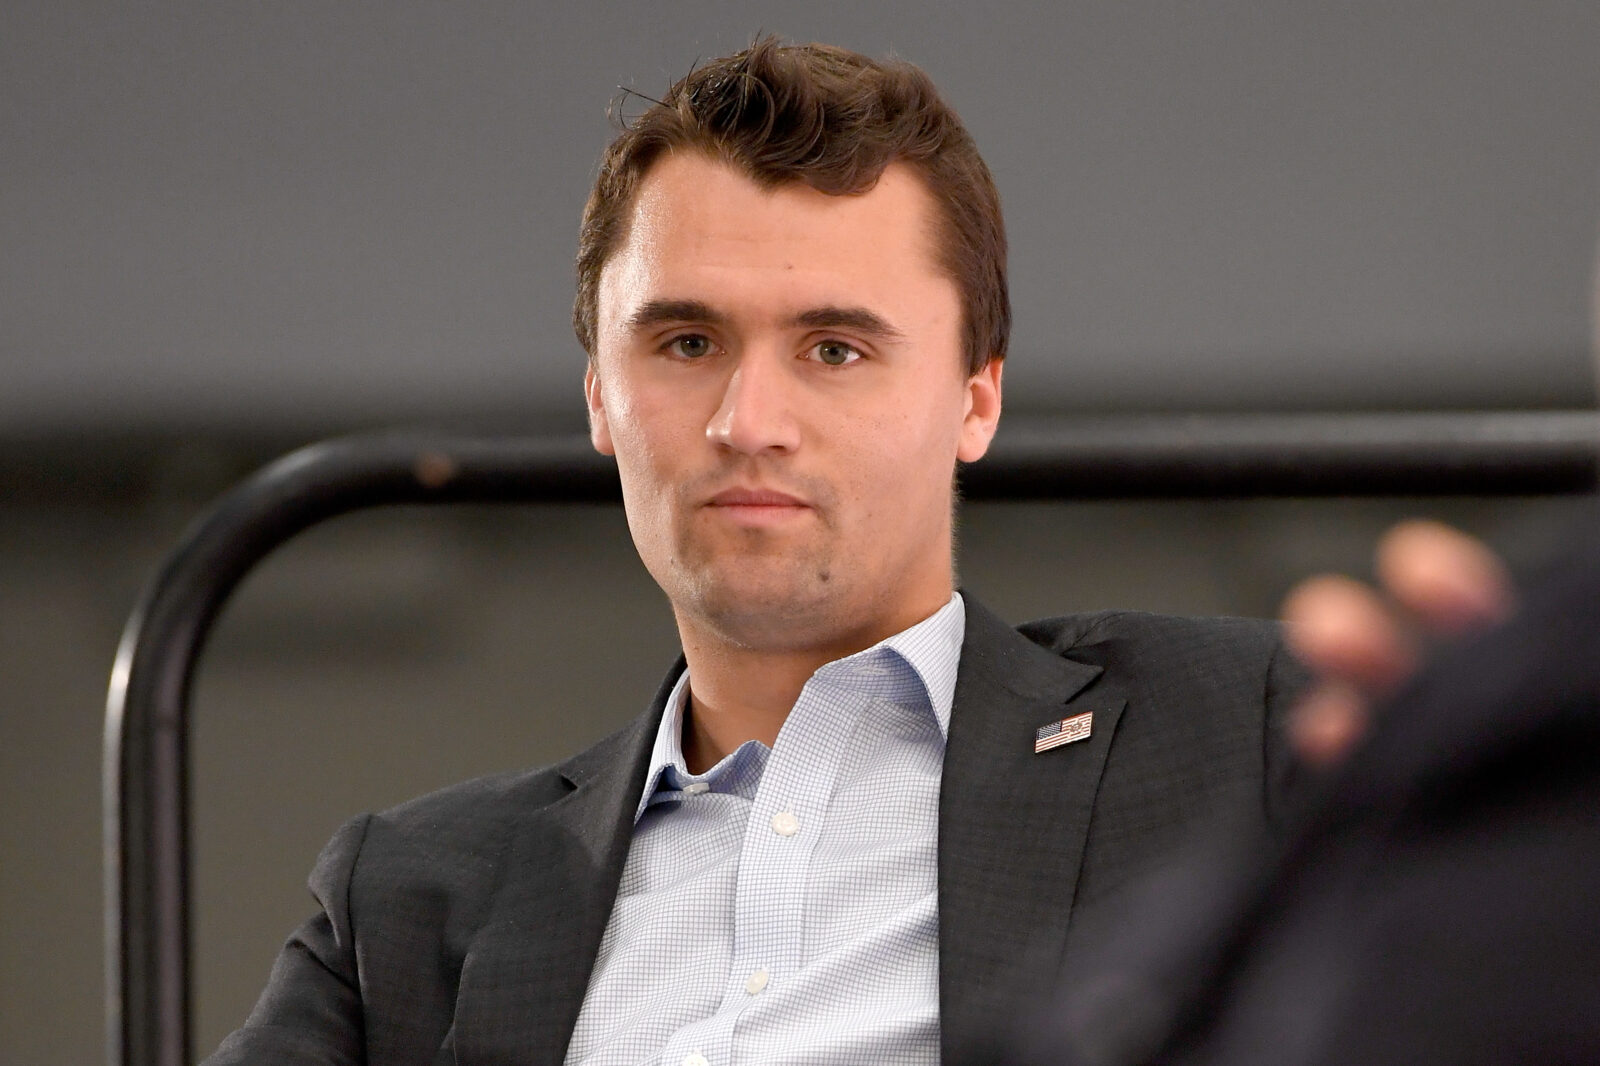 Charlie Kirk Net Worth How Rich is the Conservative Activist, Really?